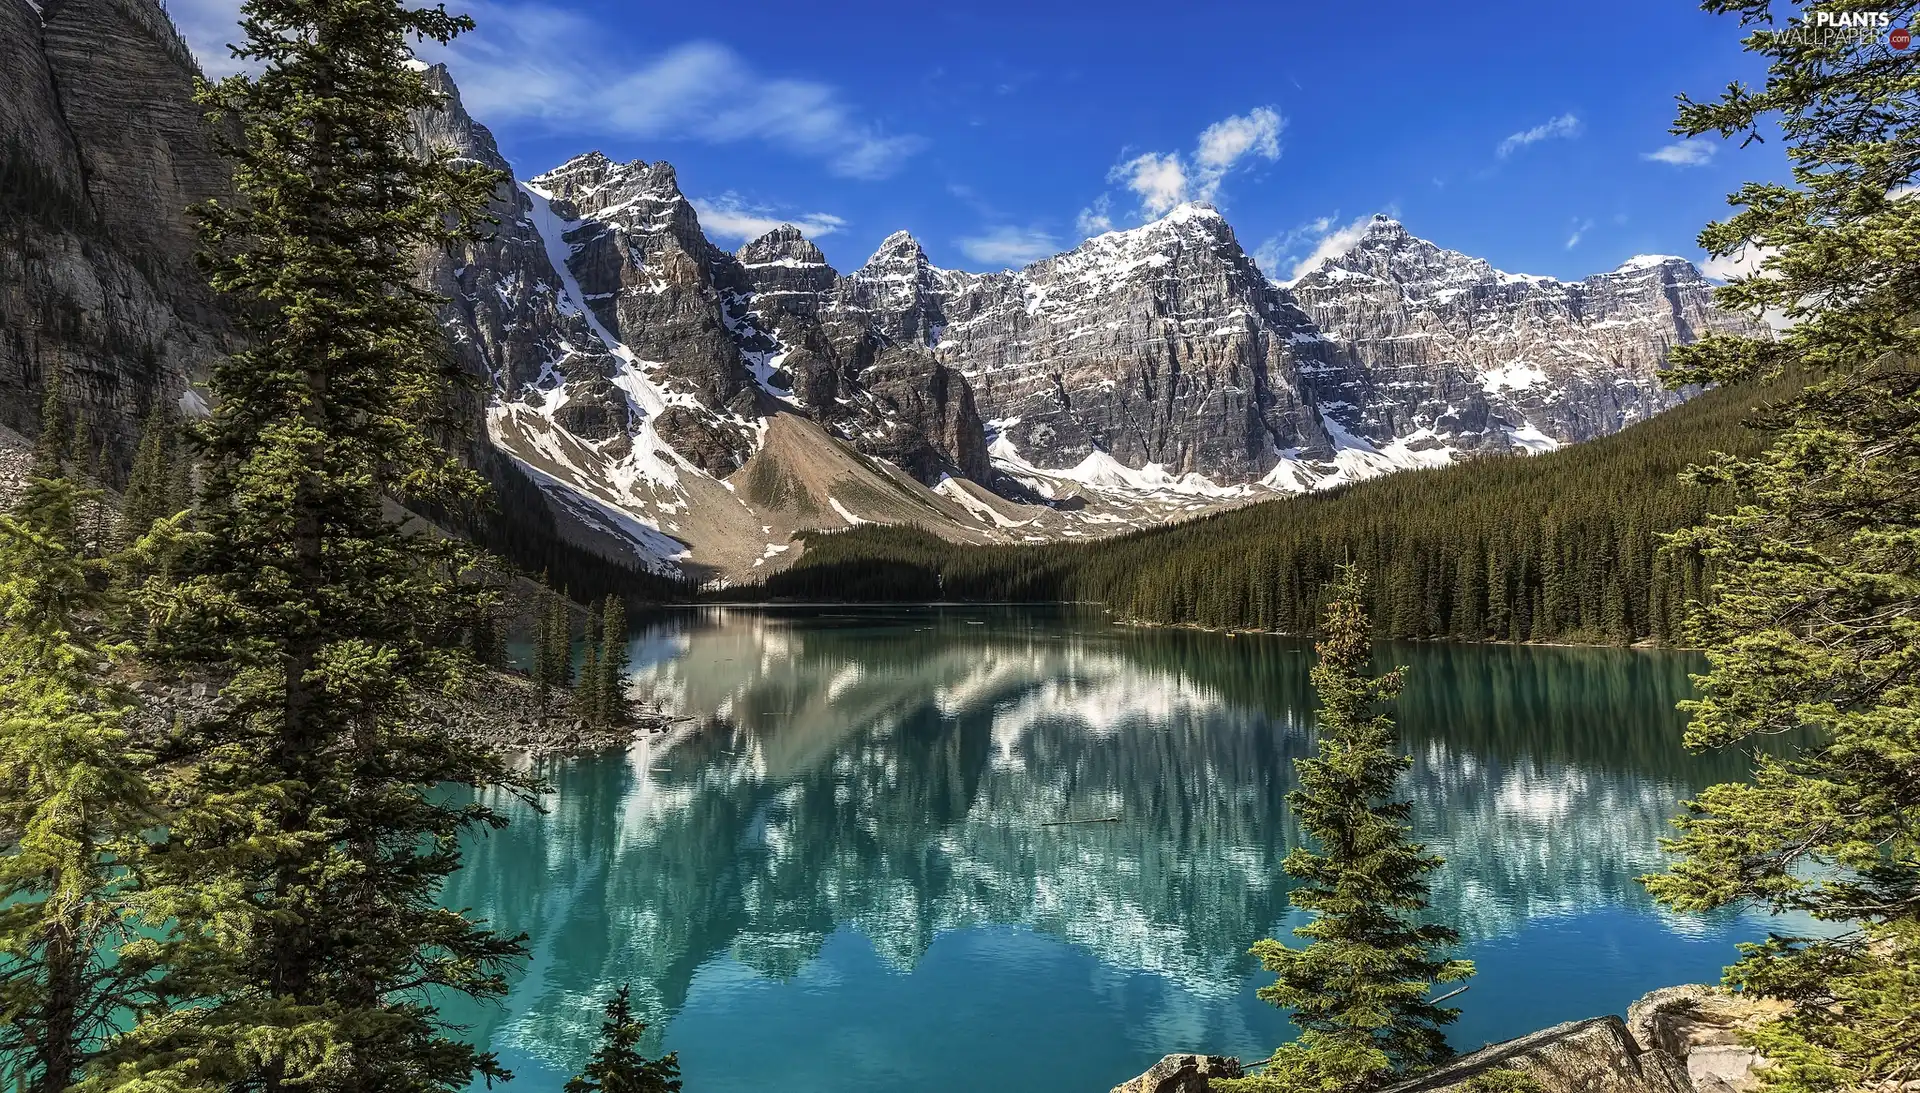 viewes, Alberta, Lake Moraine, clouds, forest, Canada, Banff National Park, reflection, Mountains, trees